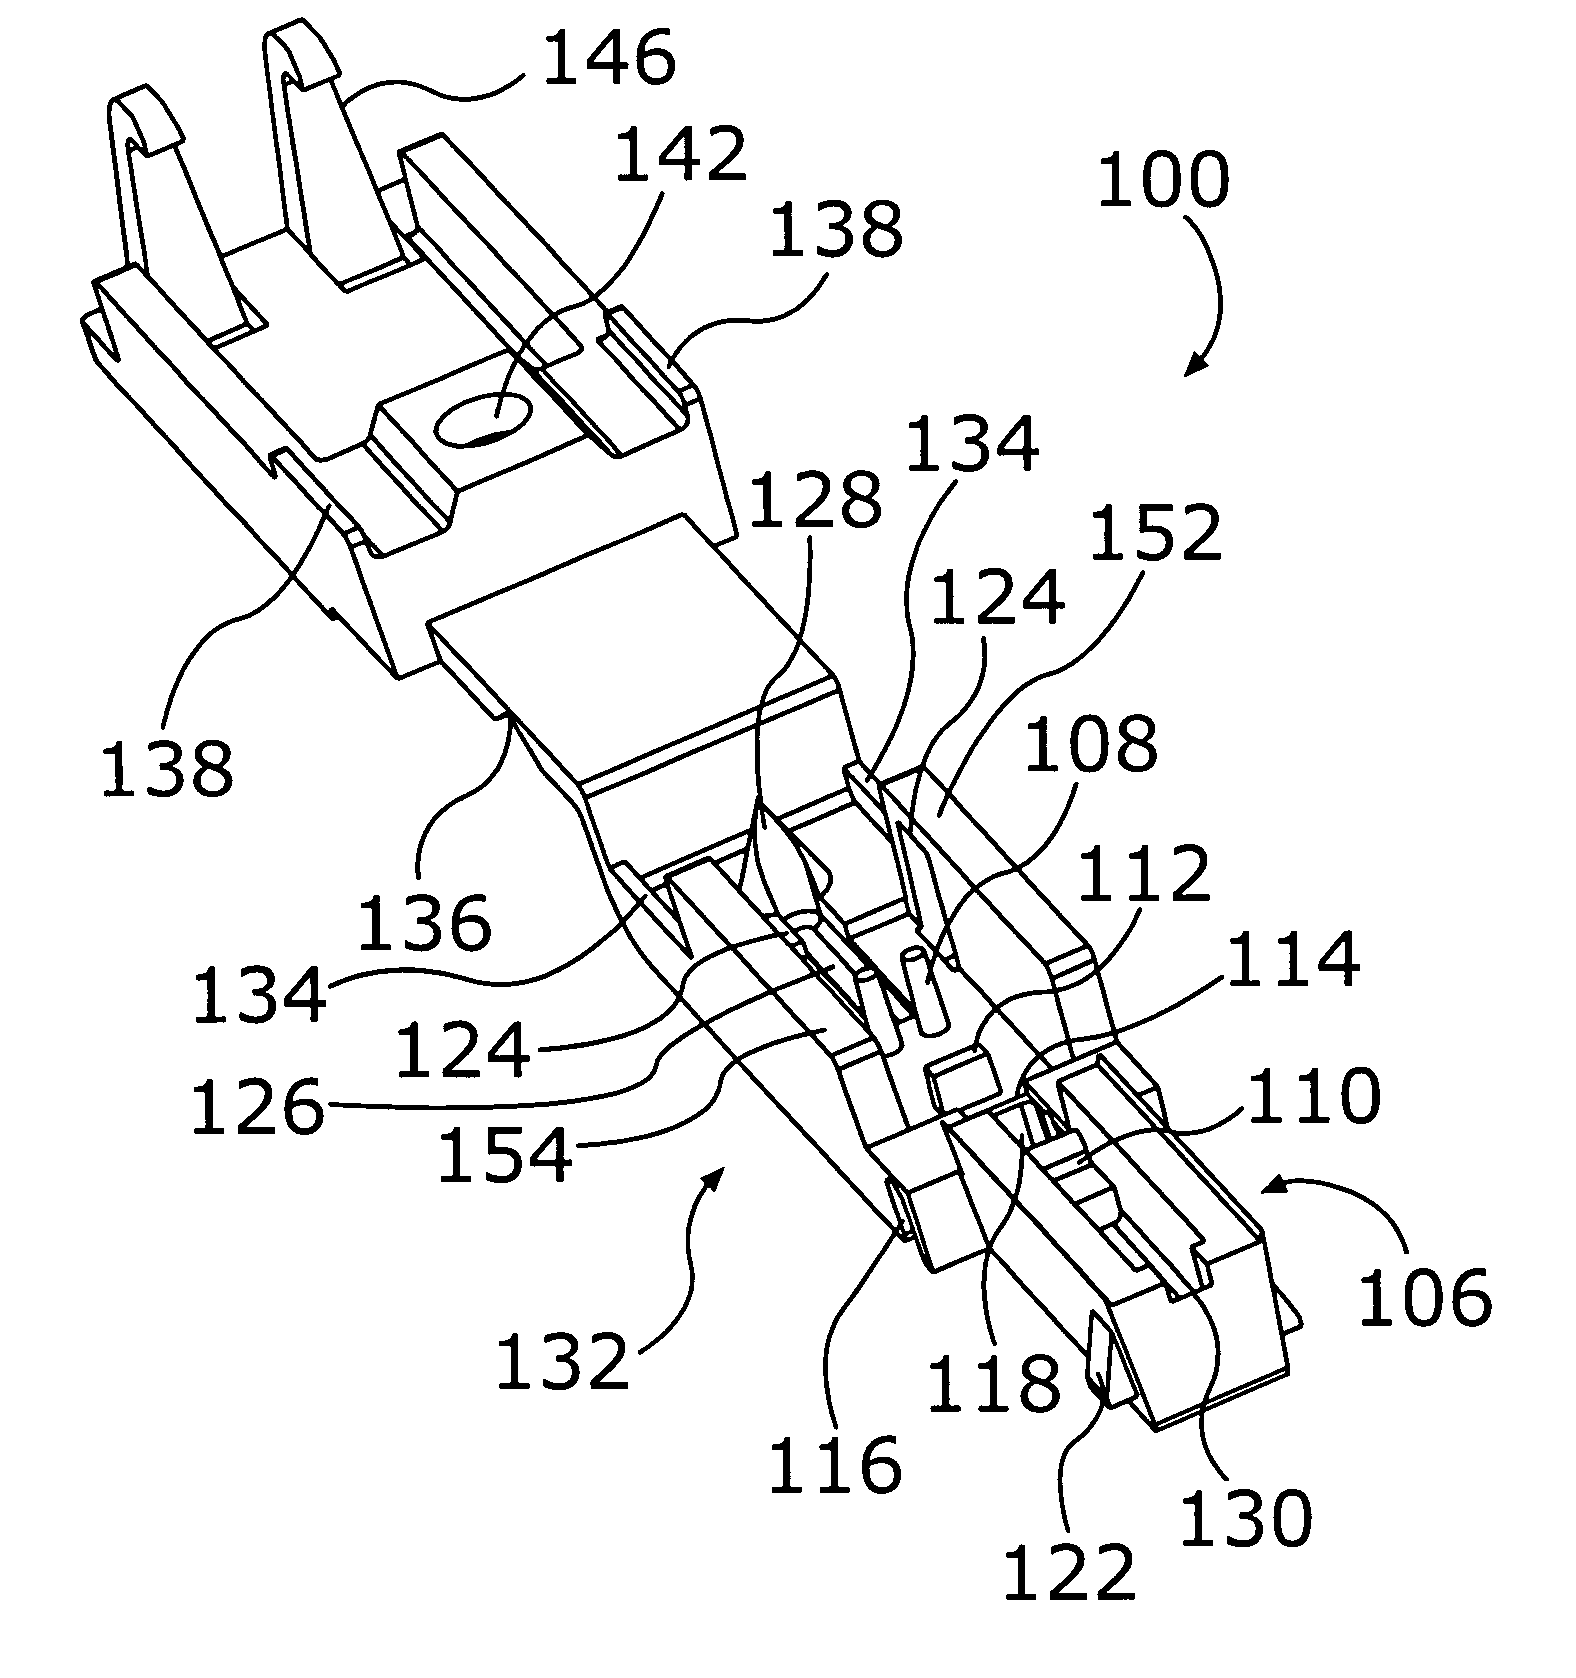 Clip-on device for coupling an electric match to a pyrotechnic fuse